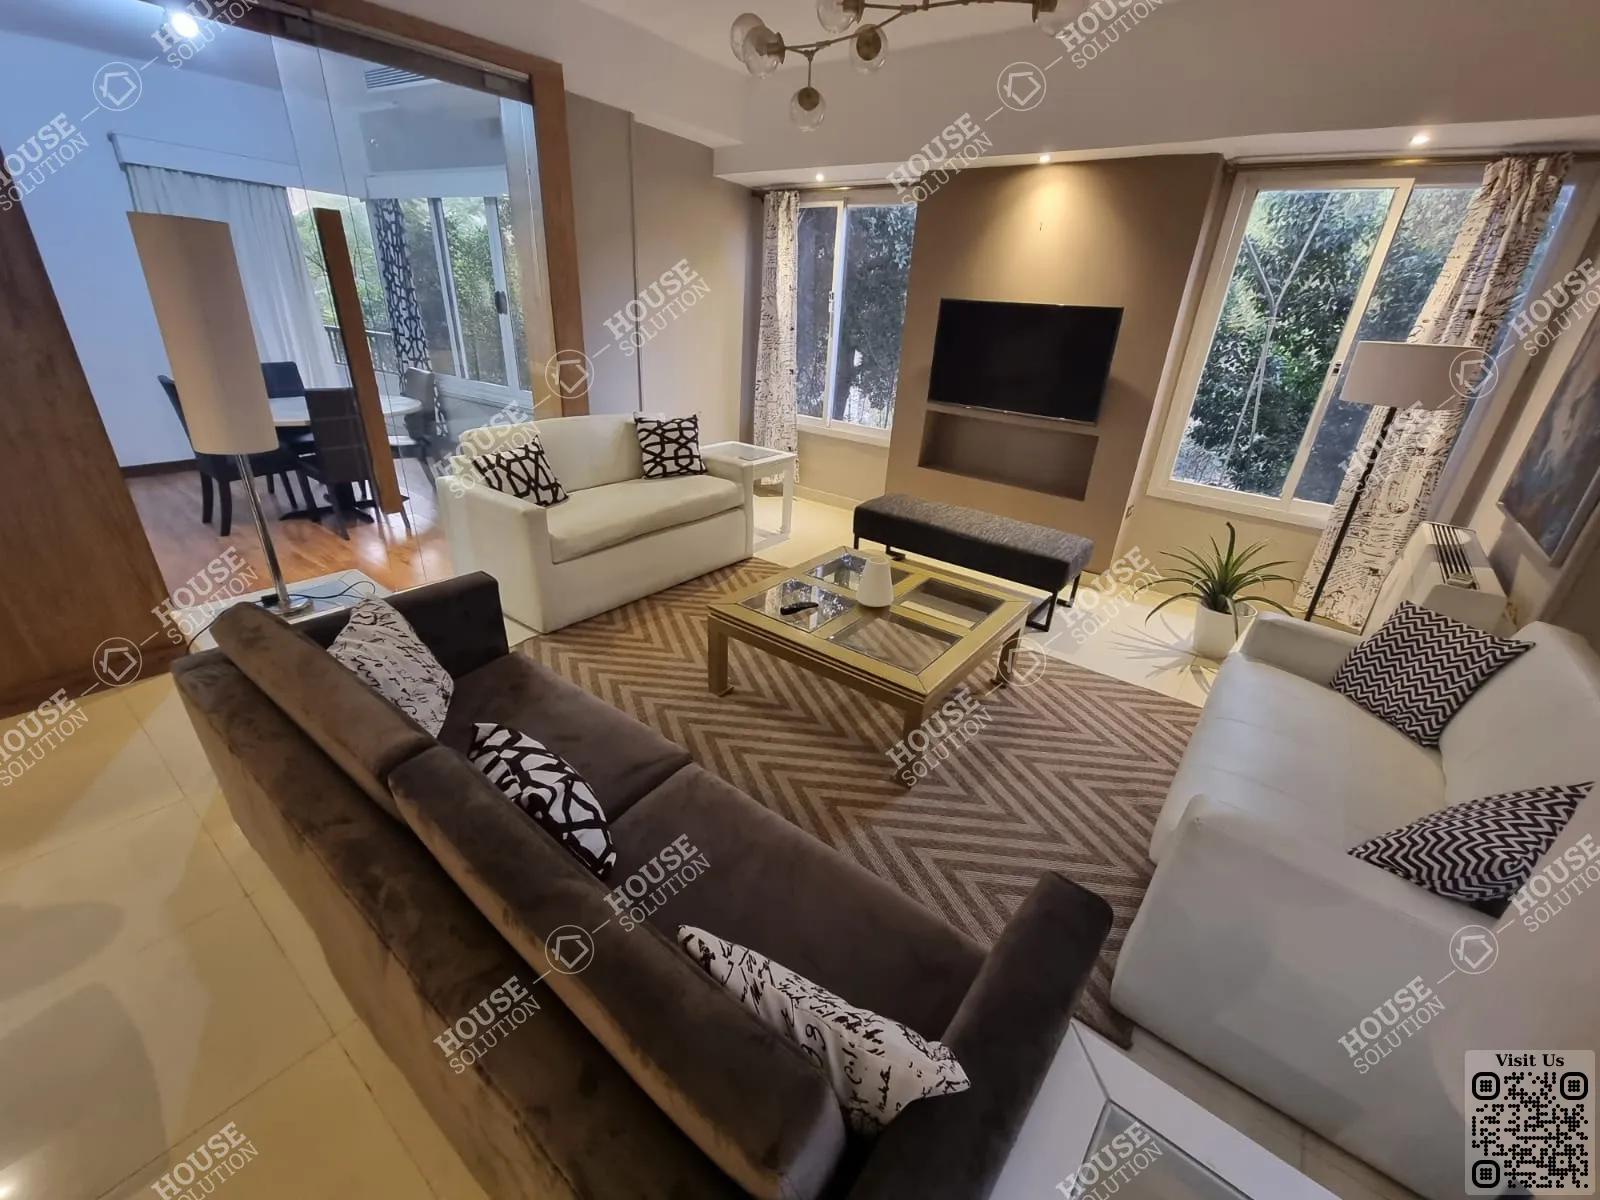 LIVING AREA  @ Apartments For Rent In Maadi Maadi Degla Area: 280 m² consists of 4 Bedrooms 3 Bathrooms Modern furnished 5 stars #3969-1